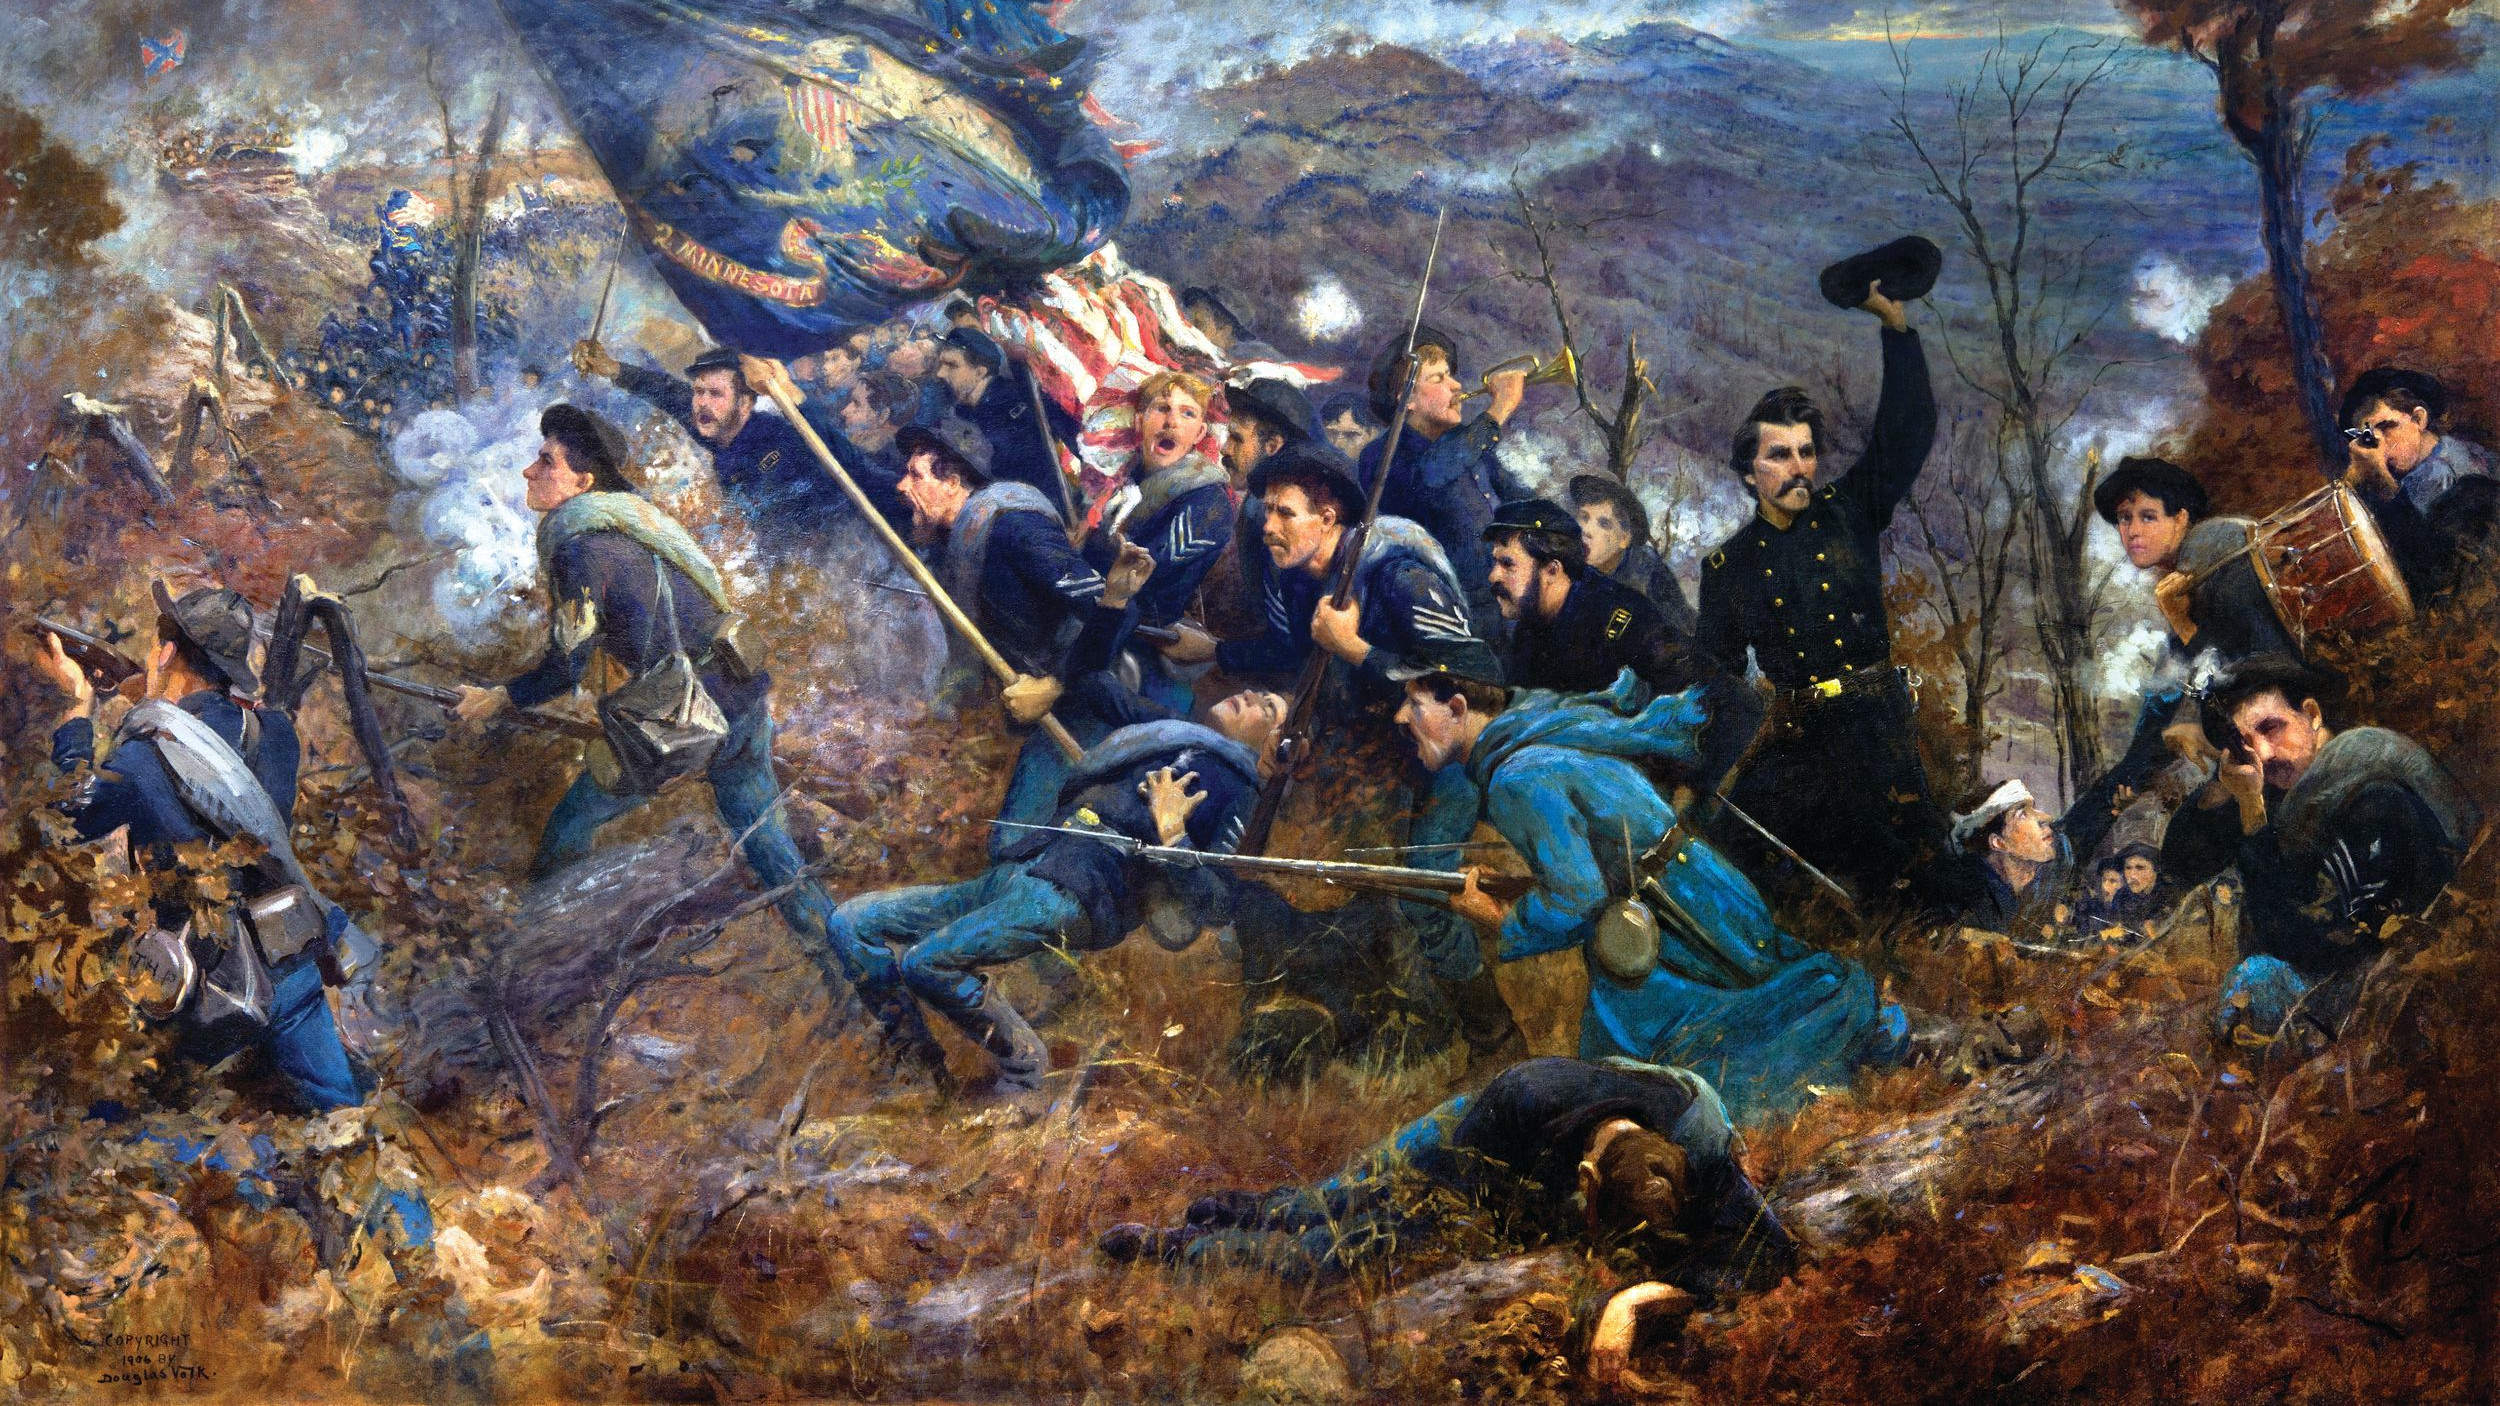 Lieutenant Colonel Judson Bishop leads the Second Minnesota Infantry in a daring charge up the slope of Missionary Ridge on November 25, 1863.